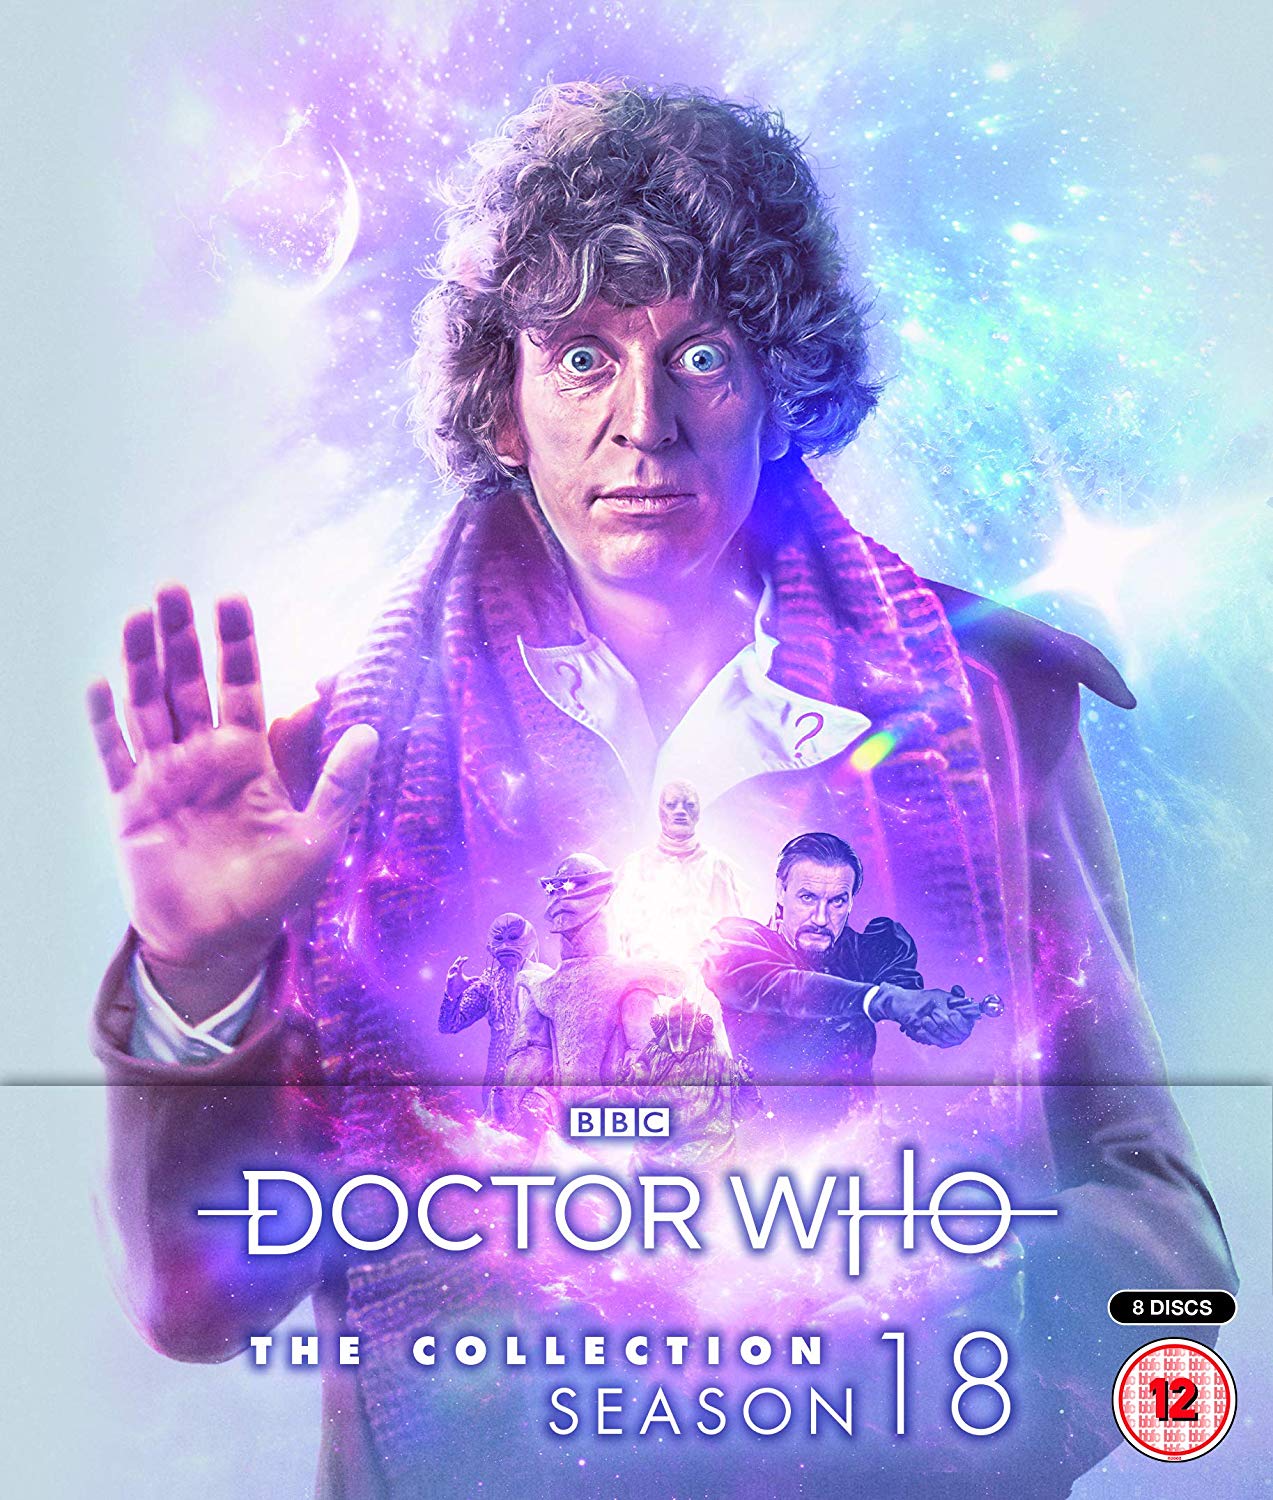 Doctor Who: Limited Edition New Who Collector's Blu-Ray Set – BBC Shop US